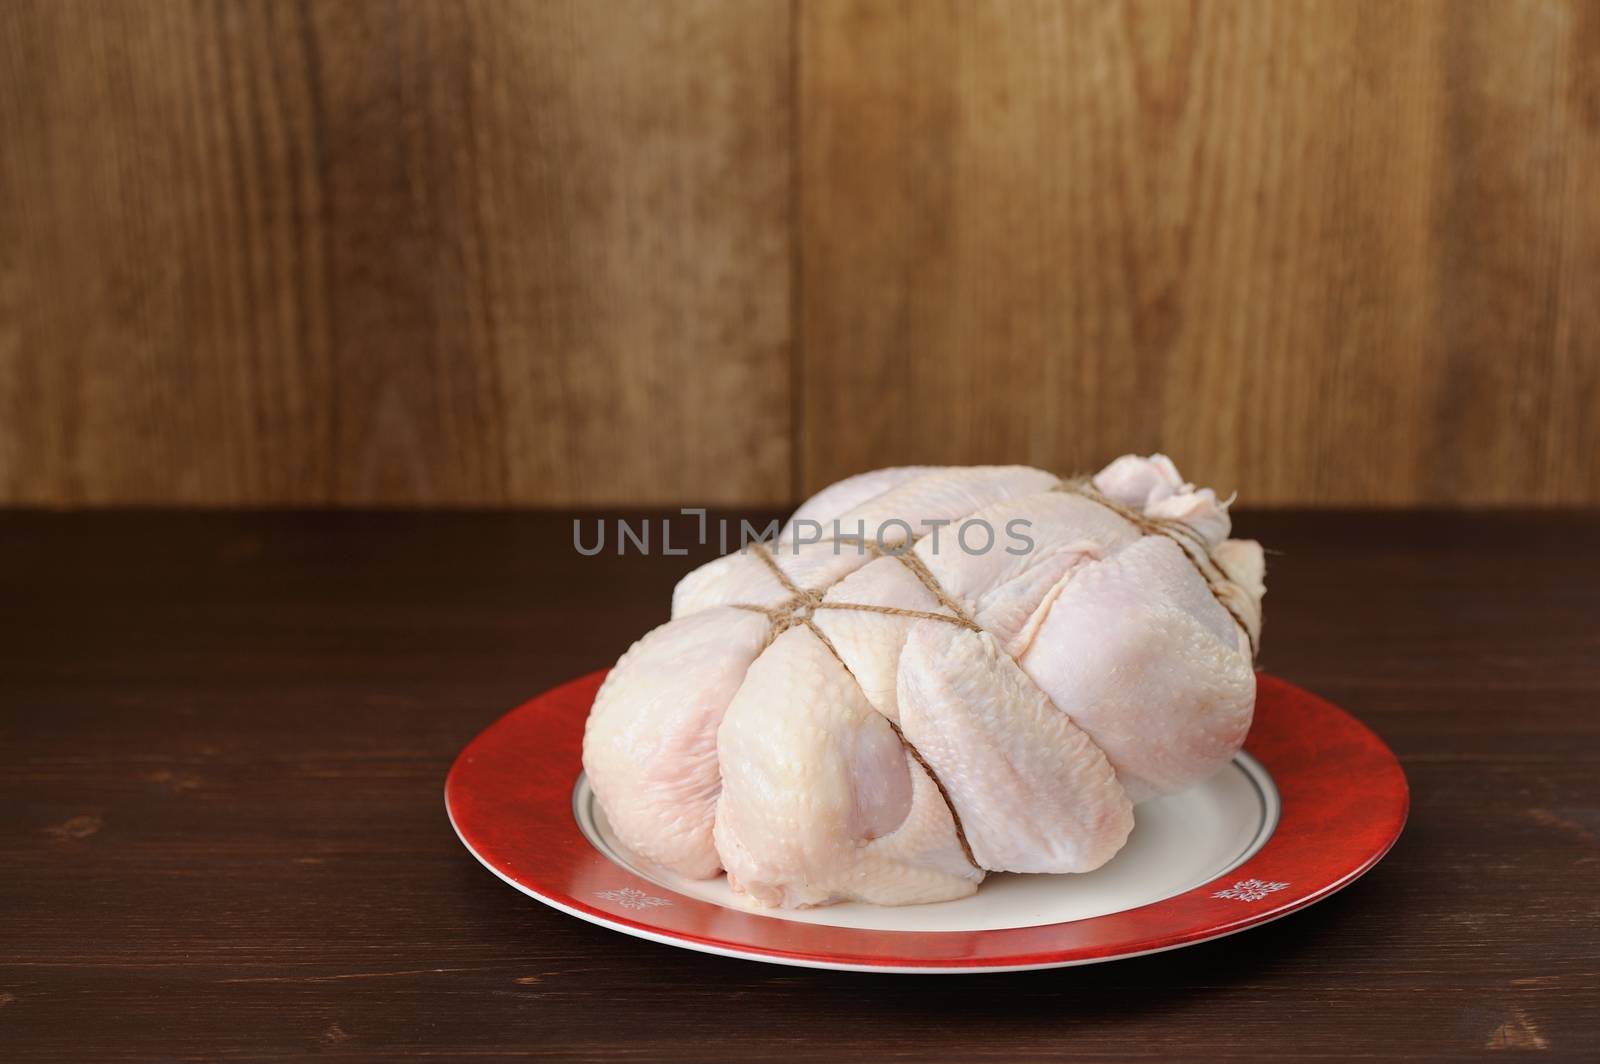 Bondage shibari raw chicken on red boarder plate on dark wood background with space horizontal